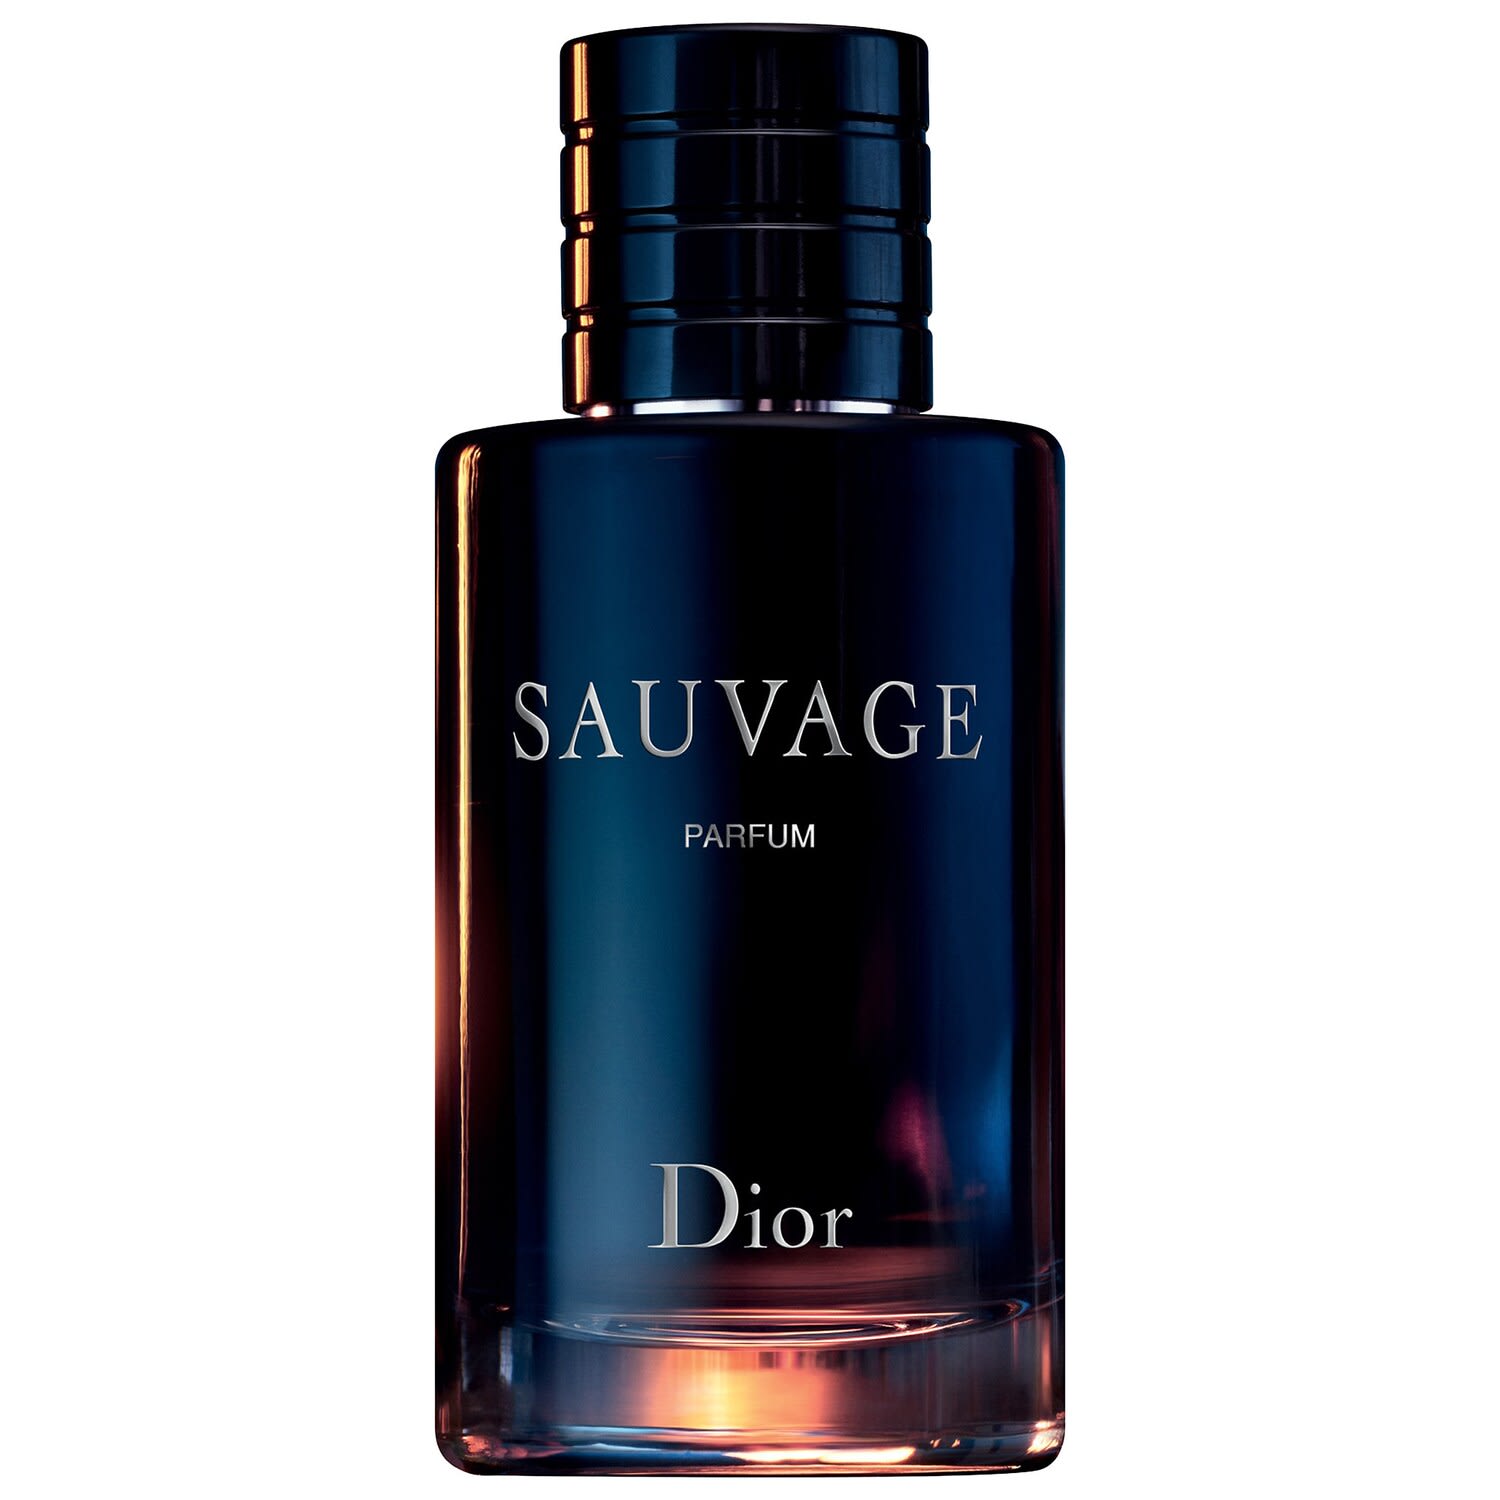 dior sauvage review reddit